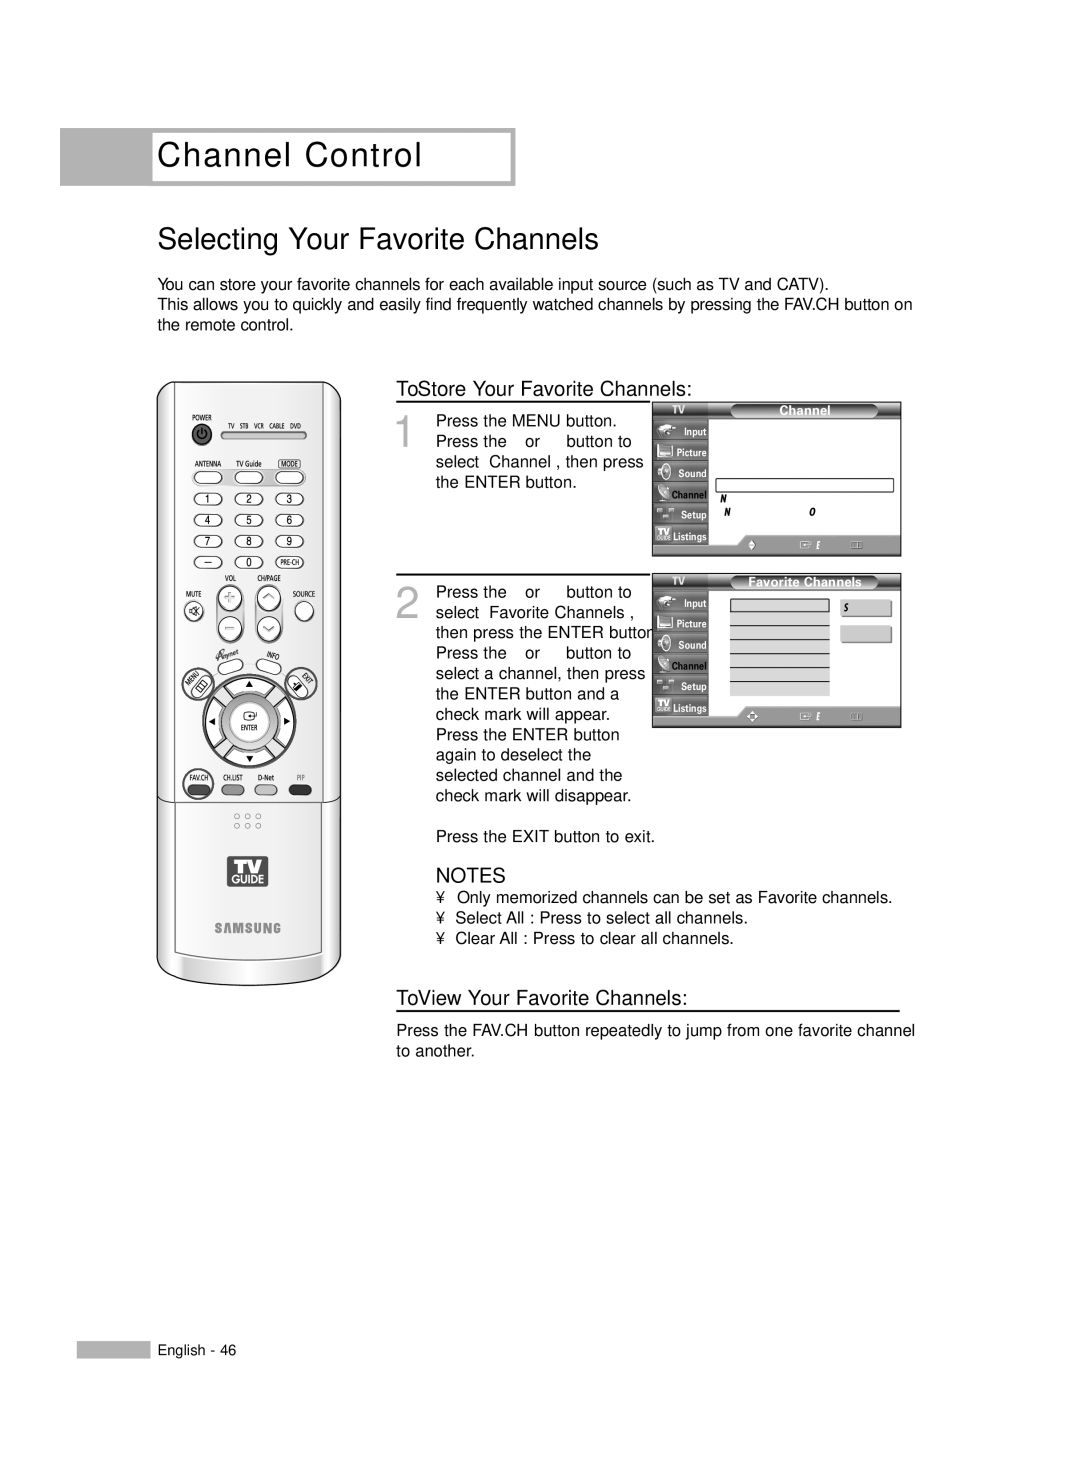 Samsung HL-R5067W, HL-R6167W, HL-R5667W Channel Control, Selecting Your Favorite Channels, To Store Your Favorite Channels 